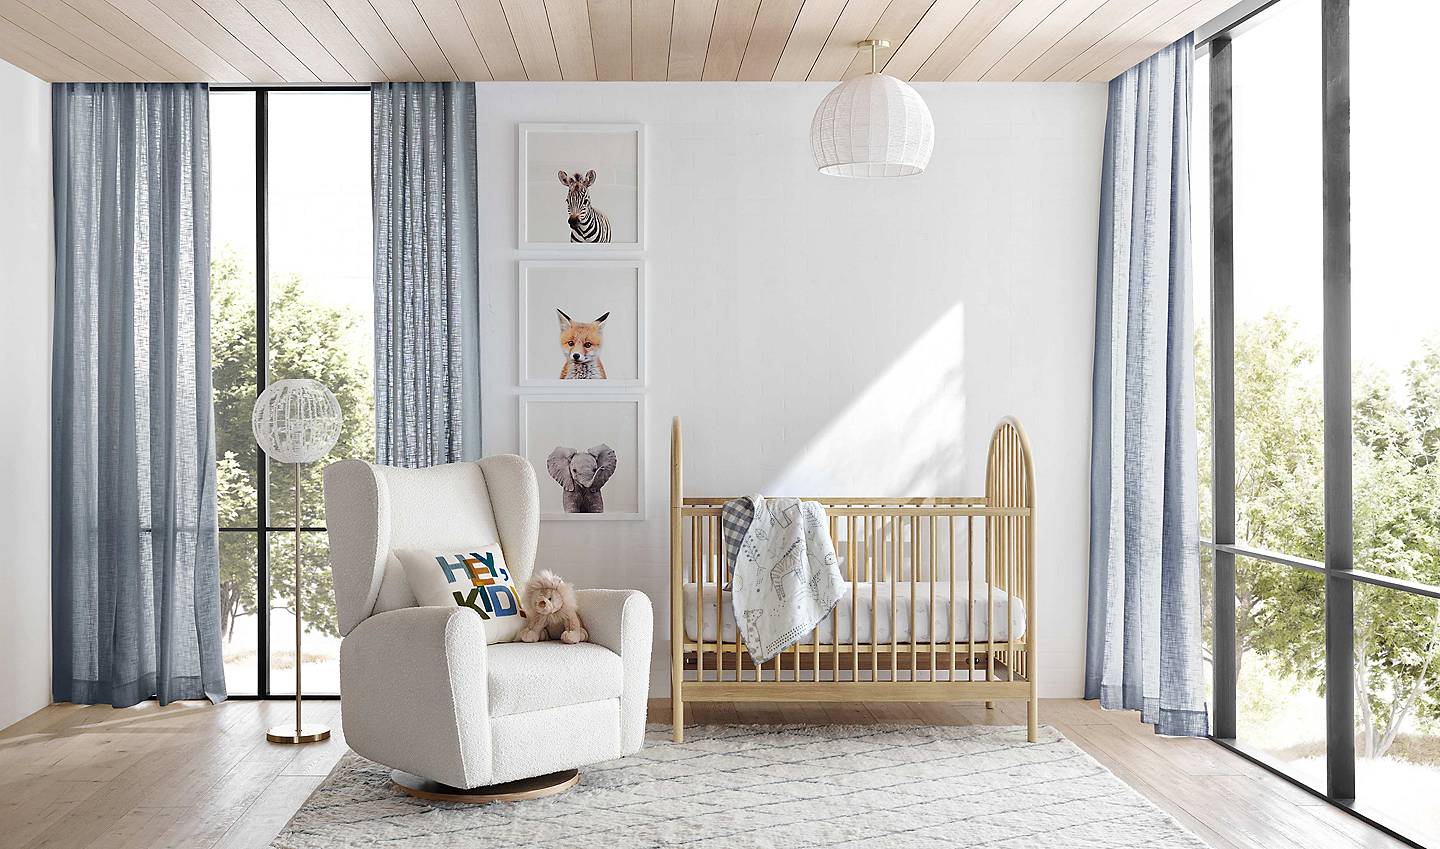 Lighting and Lamp ideas for Kids' Rooms - by Kids Interiors